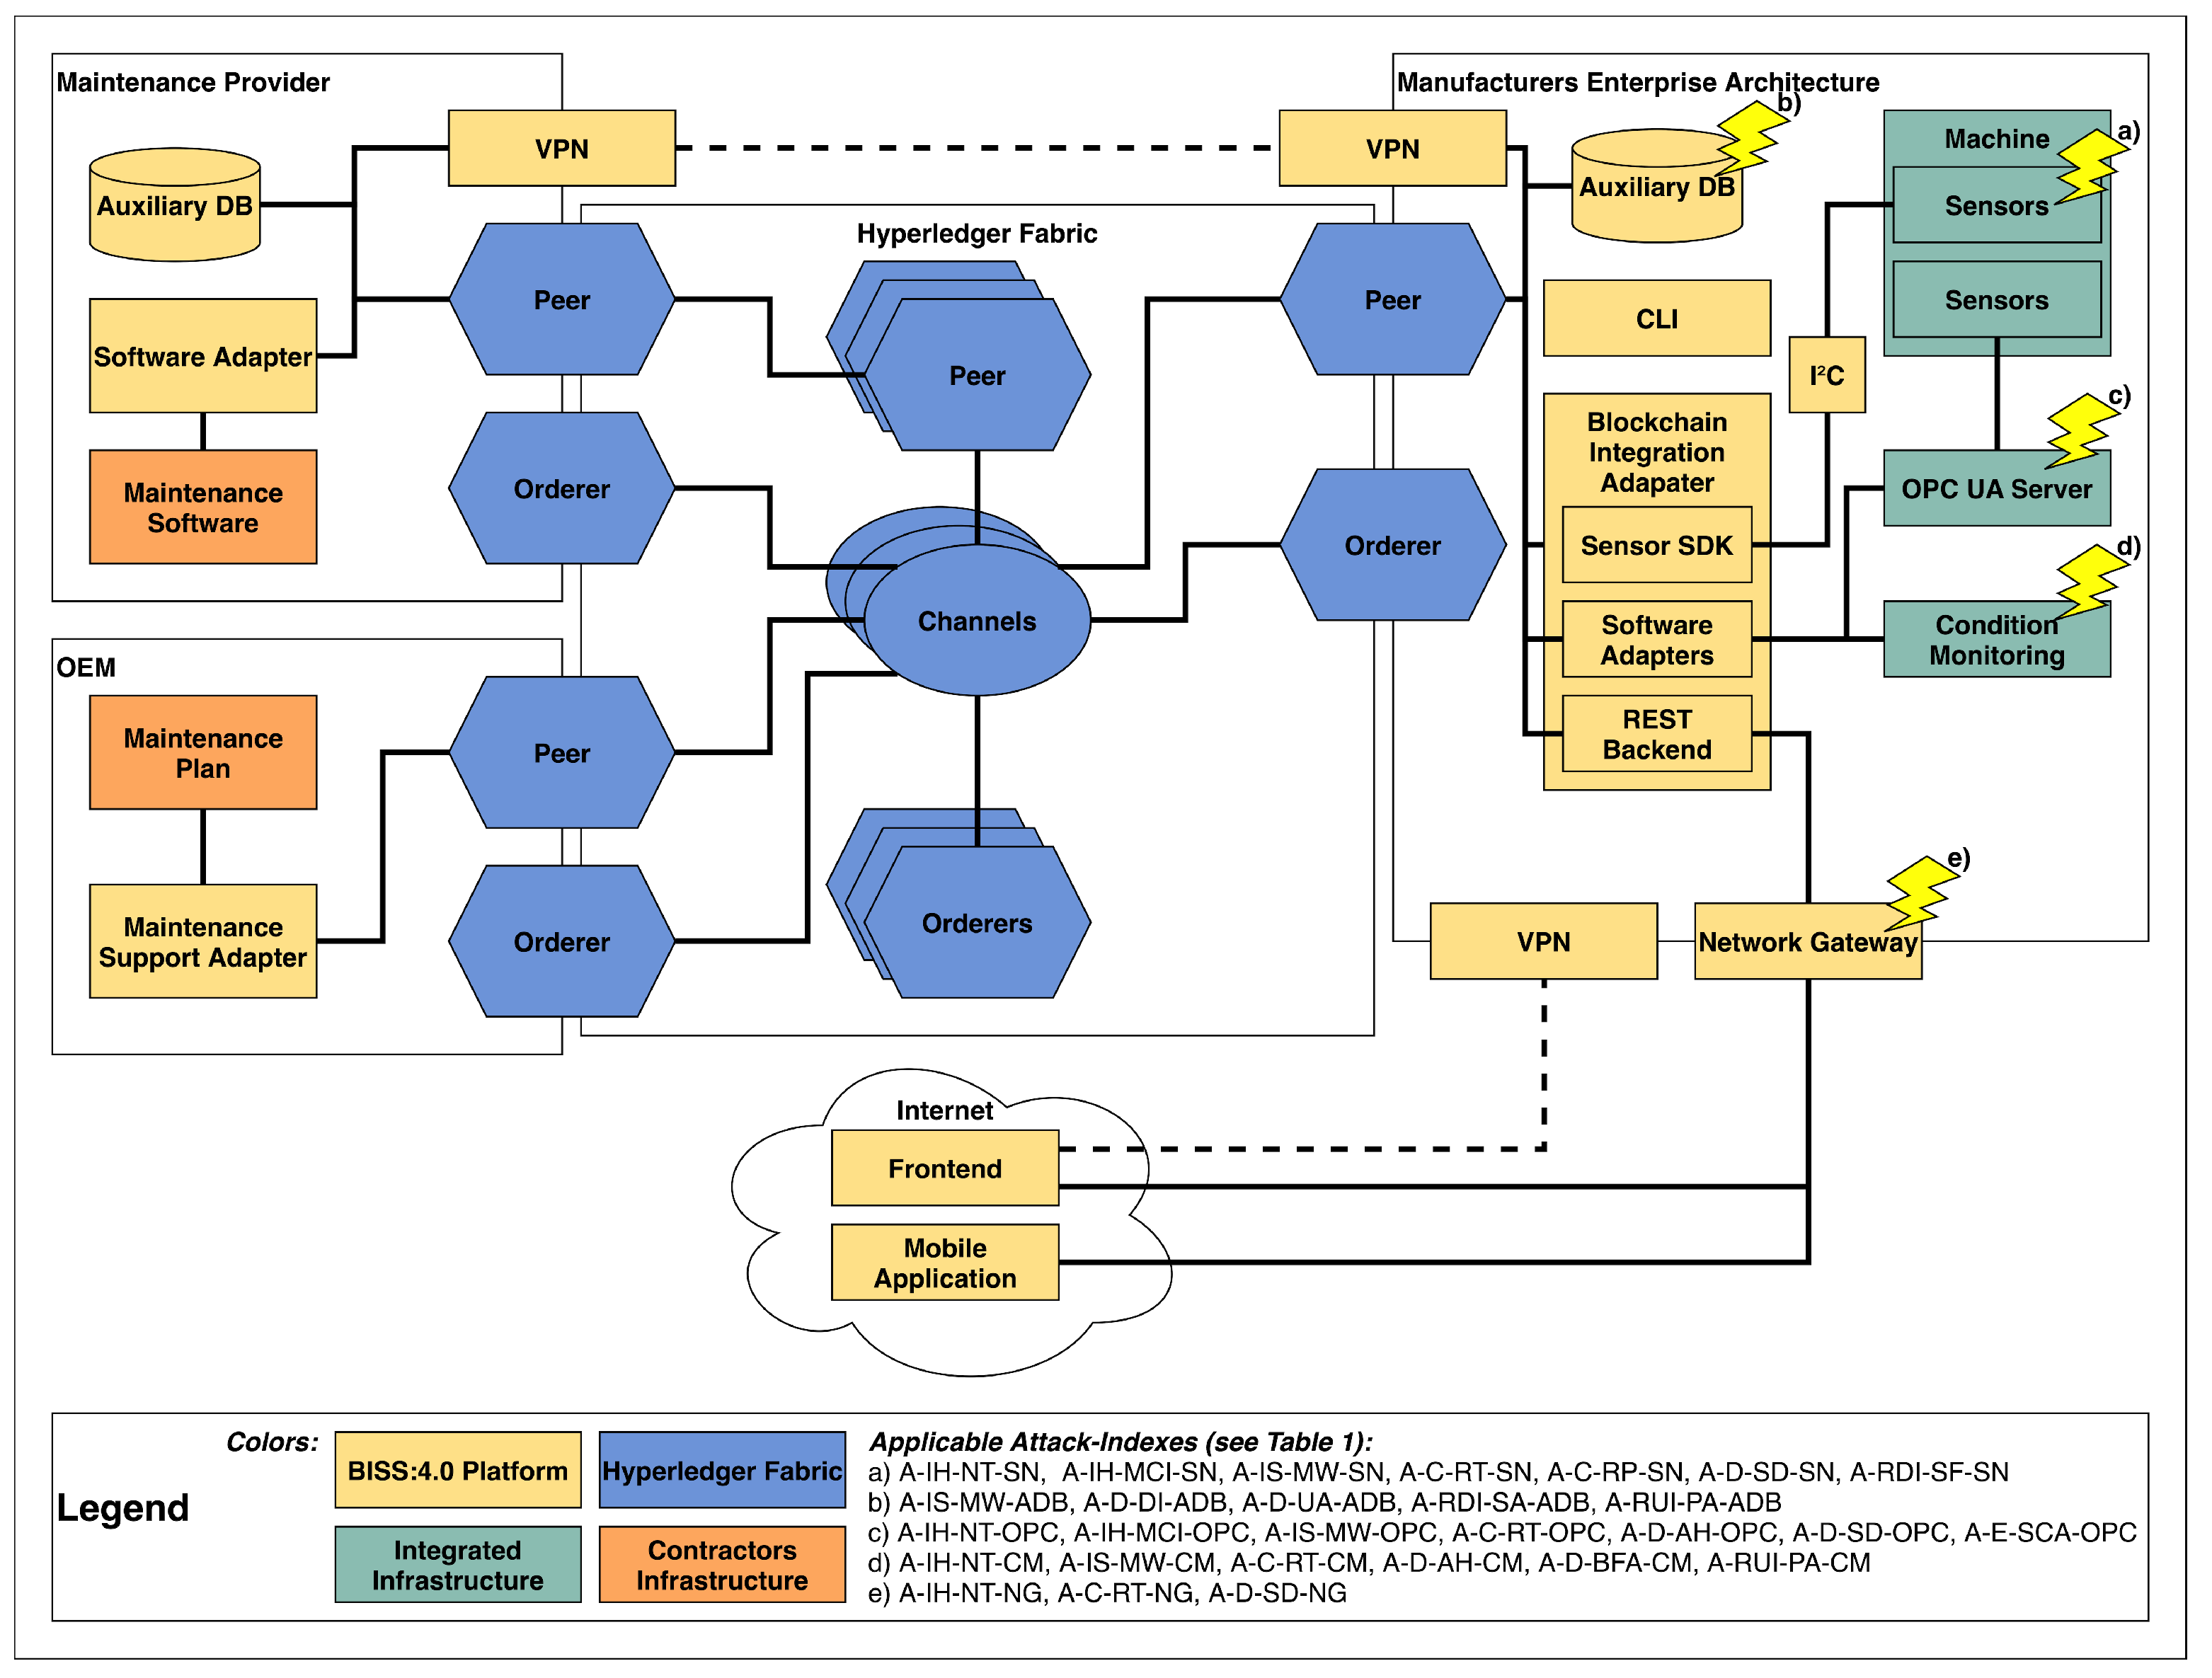 FME Server and N-Tier Architecture